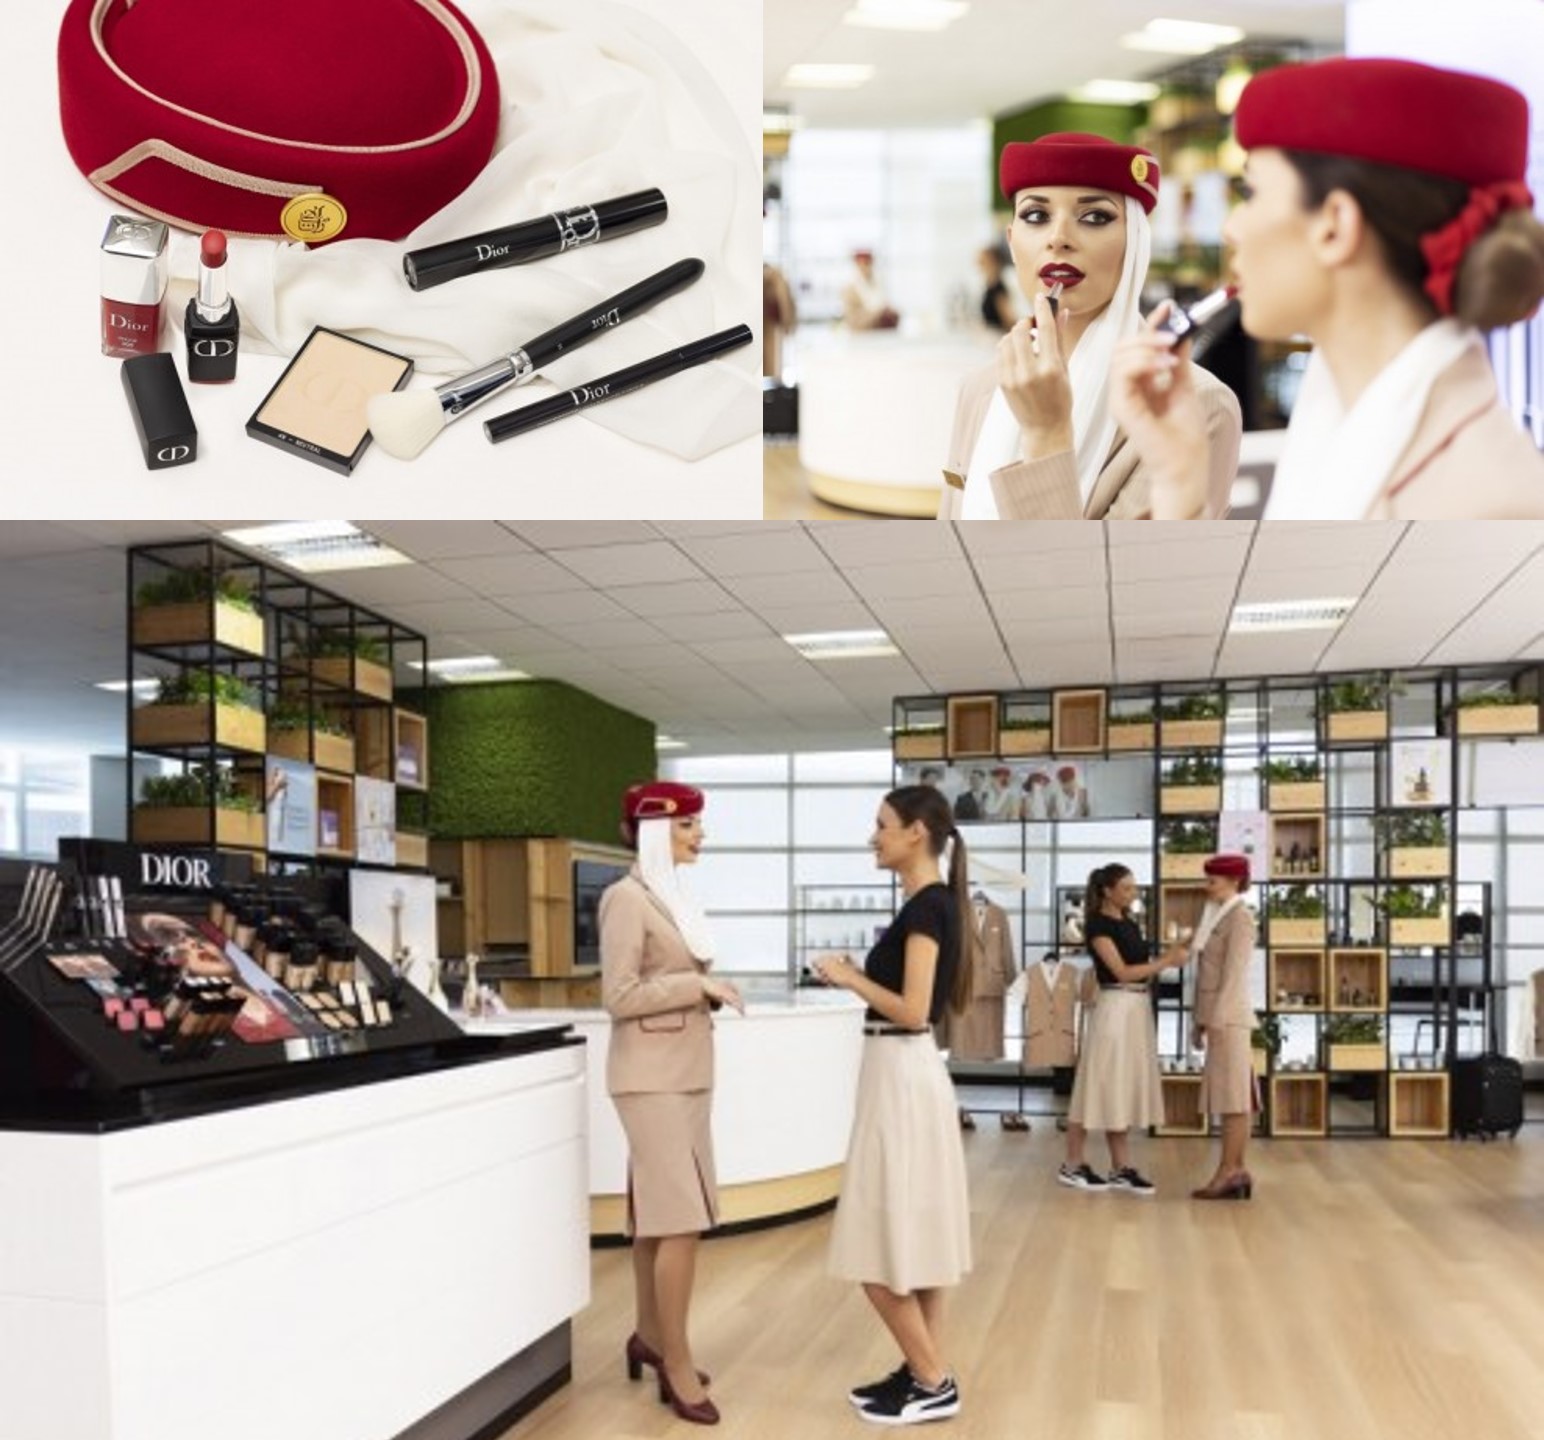 Emirates launches collaboration with Dior Beauty and Davines inaugurating exclusive beauty hub for cabin crew